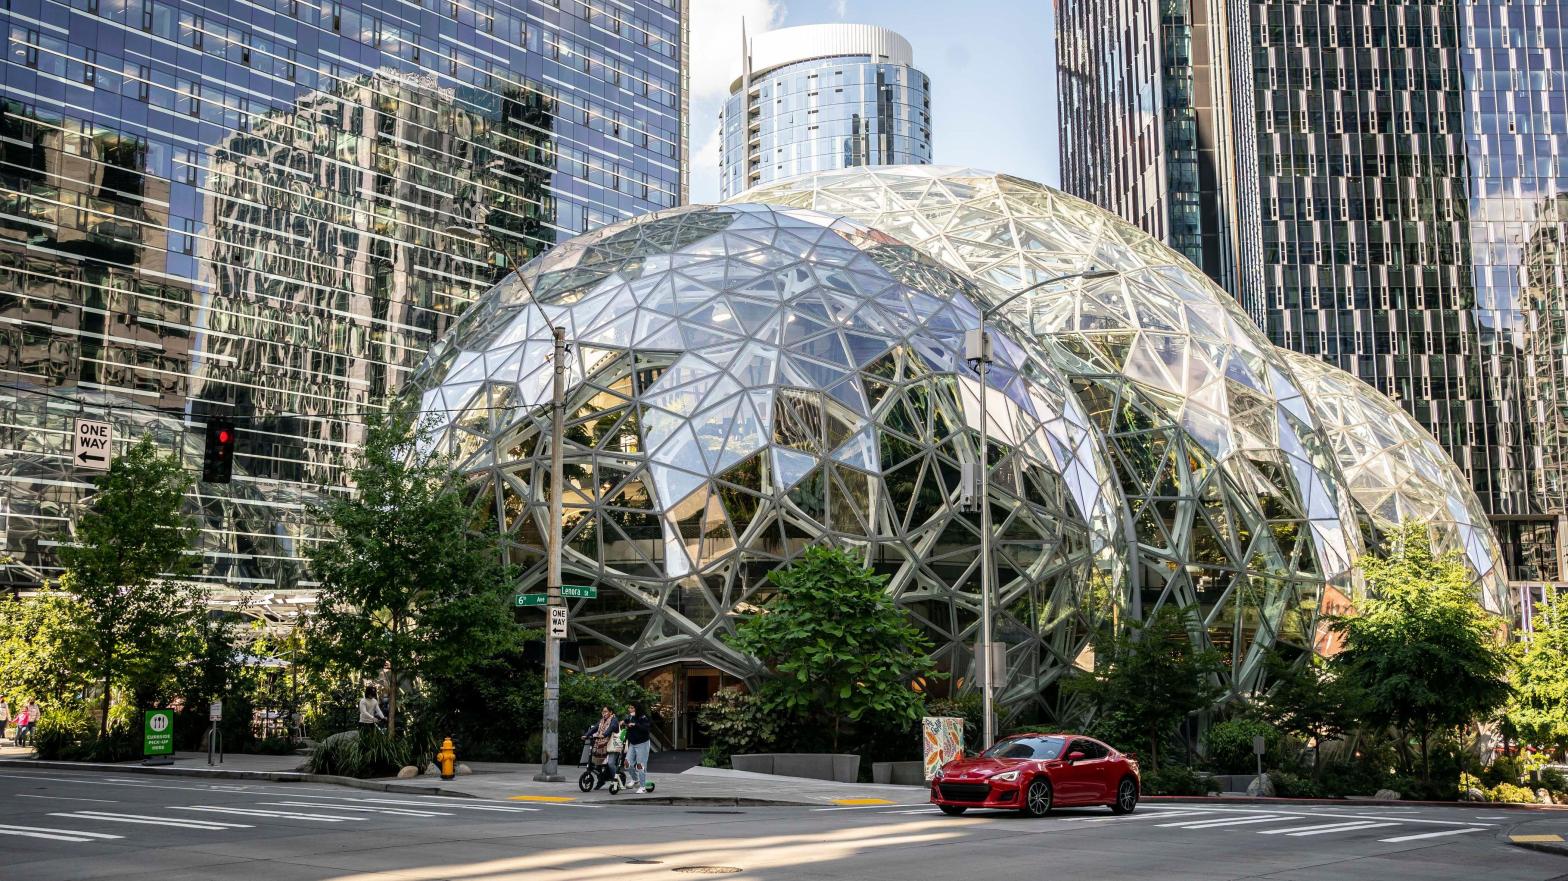 The Spheres — Amazon's corporate headquarters — in Seattle.  (Image: David Ryder, Getty Images)